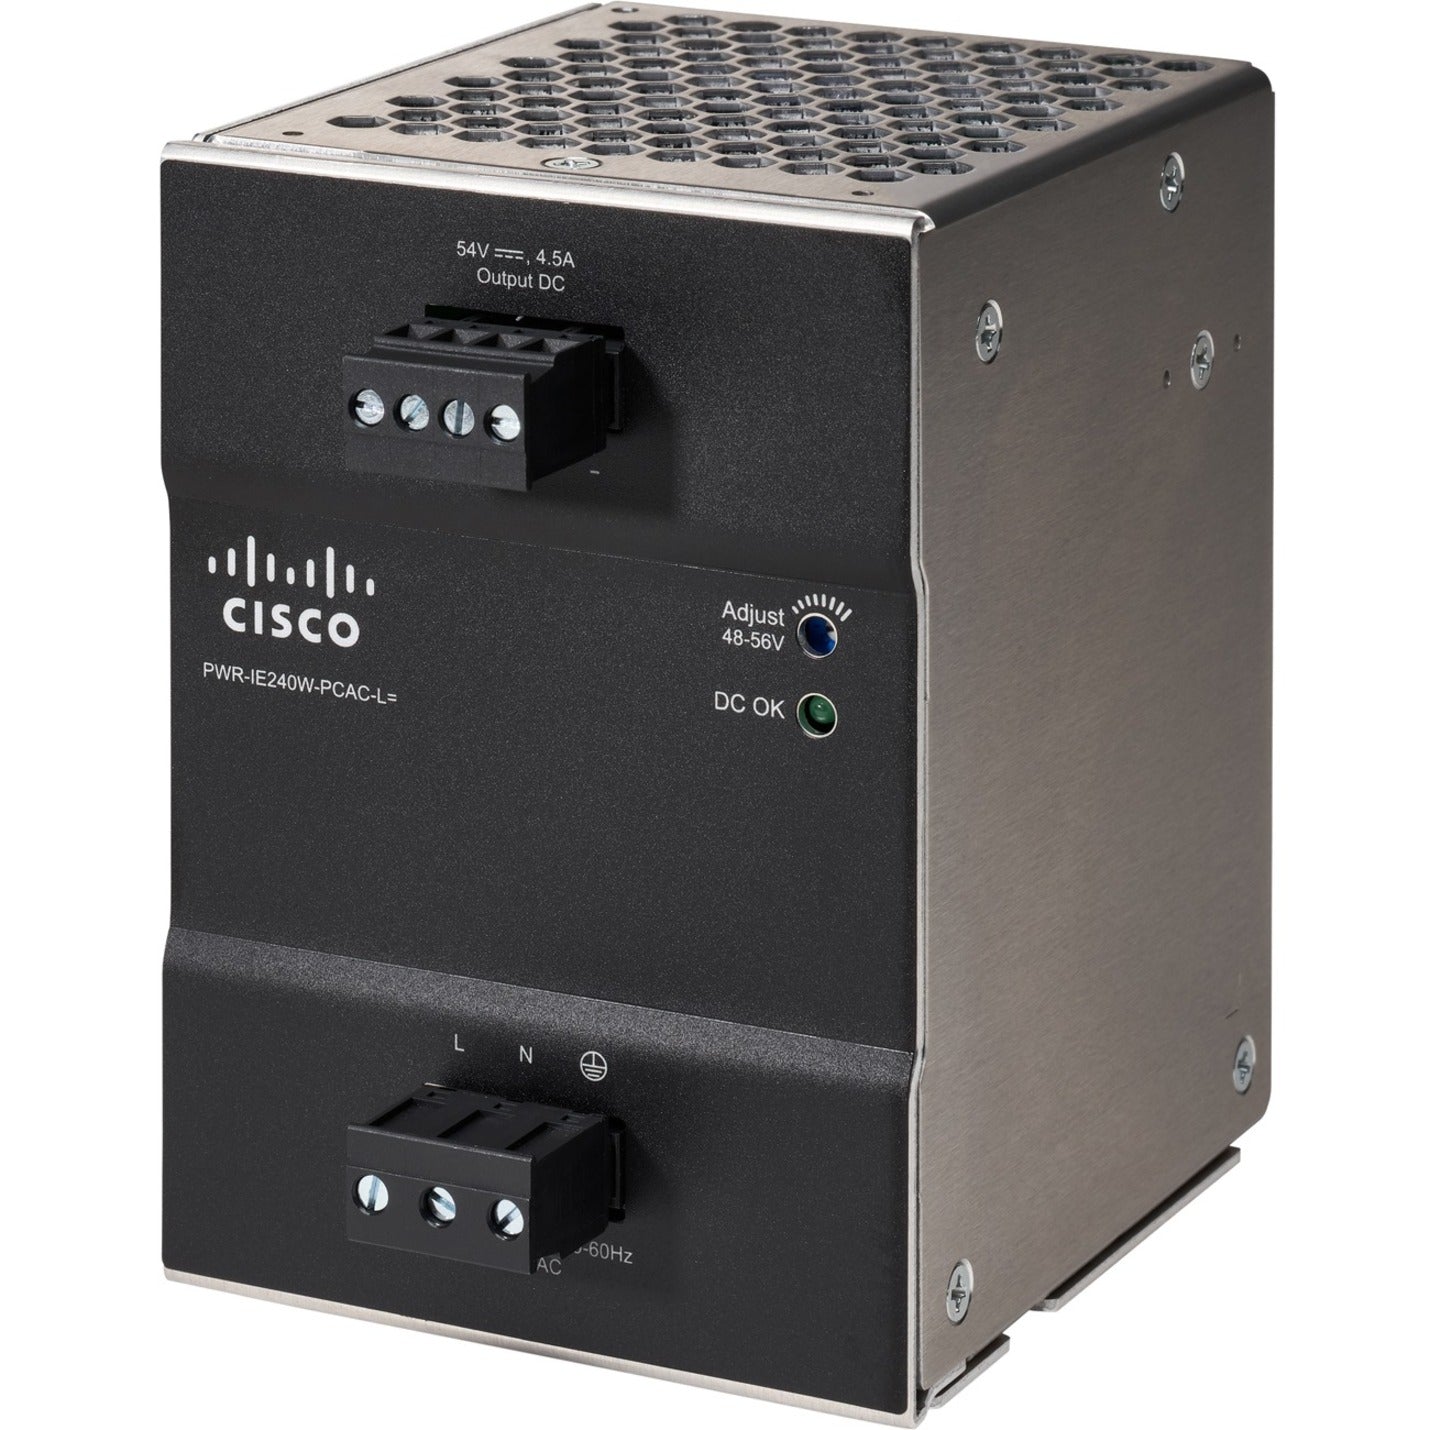 Cisco PWR-IE240W-PCAC-L= Power Supply, Compatible with Cisco Catalyst IE3200 Rugged Series Server